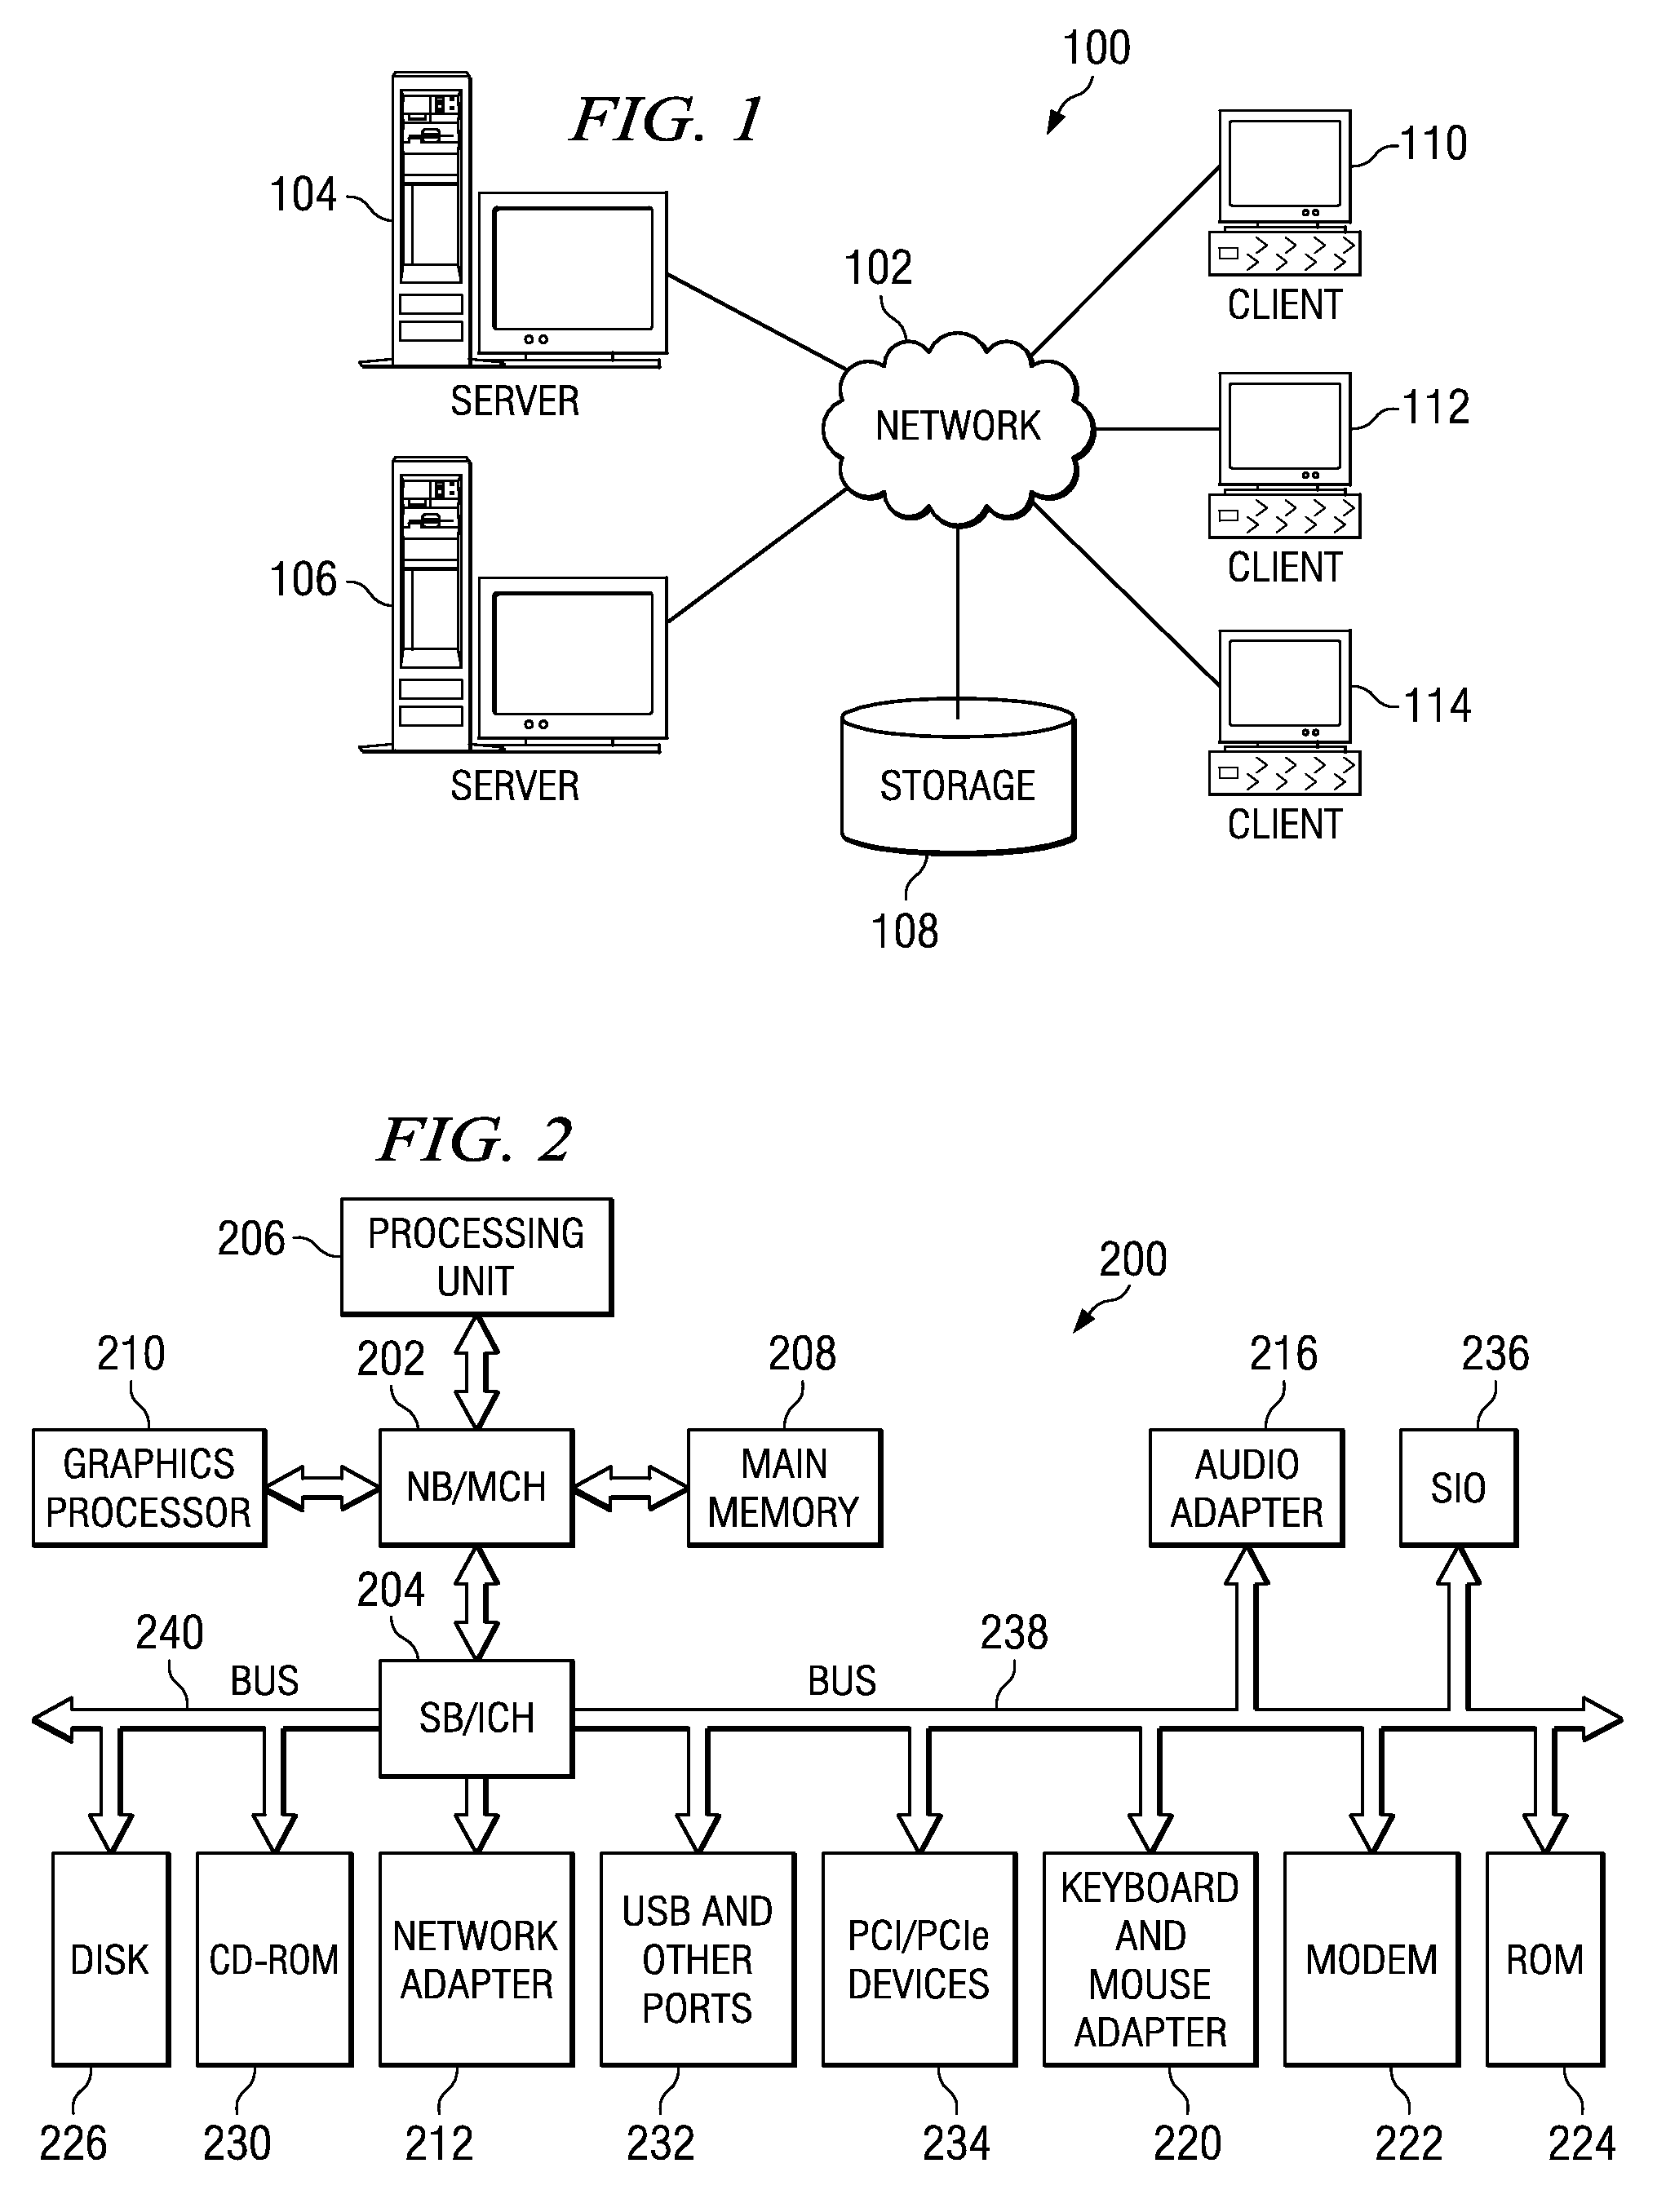 System and Method for Providing Reliability of Communication Between Supernodes of a Multi-Tiered Full-Graph Interconnect Architecture